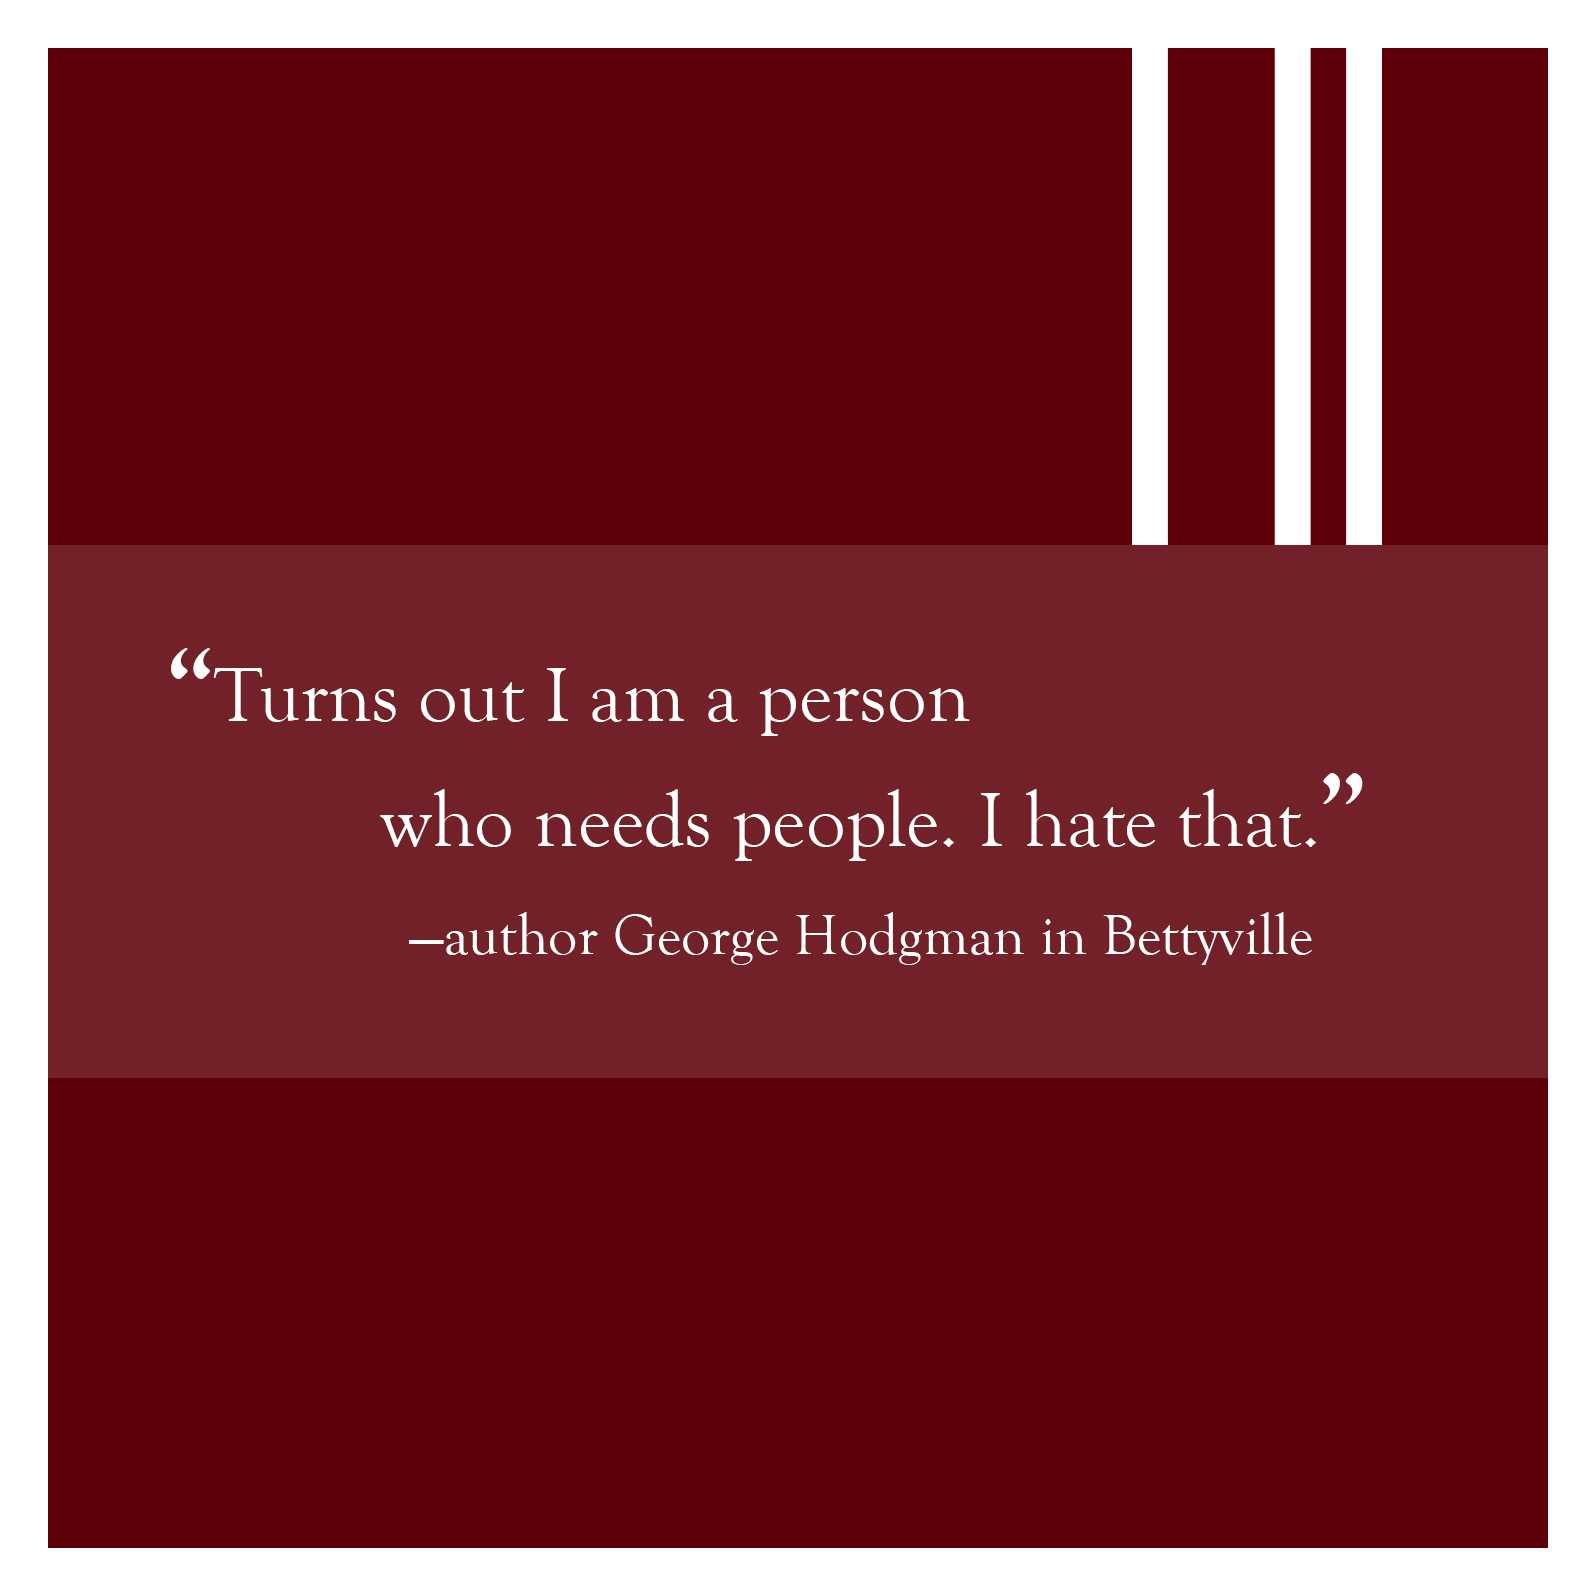 Quote from Bettyville: "Turns out I am a person who needs people. I hate that."